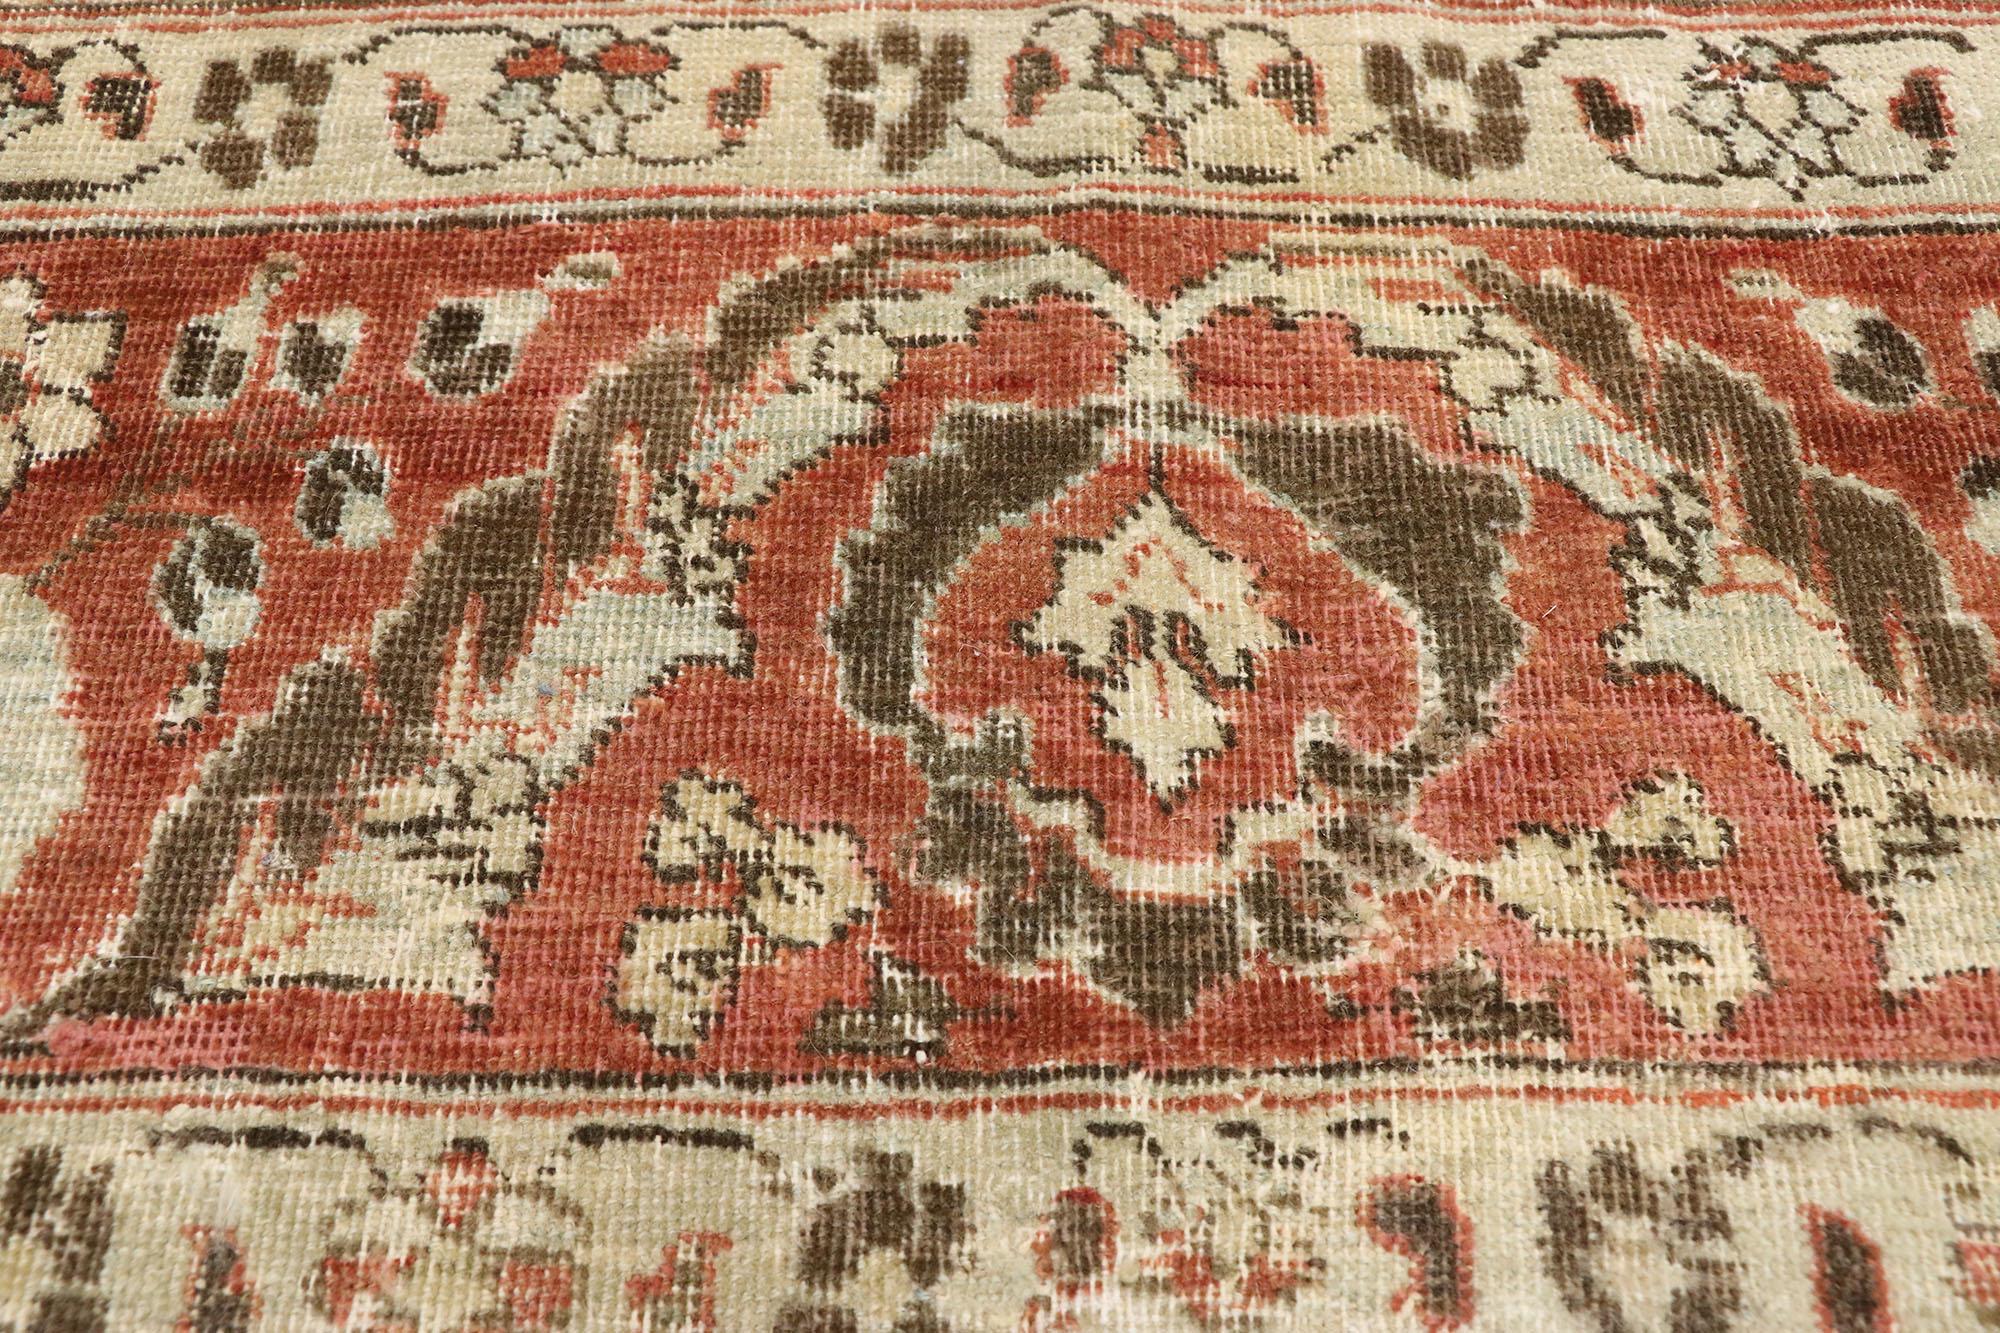 Turkish Distressed Antique Persian Mahal Design Rug with English Manor Chintz Style For Sale